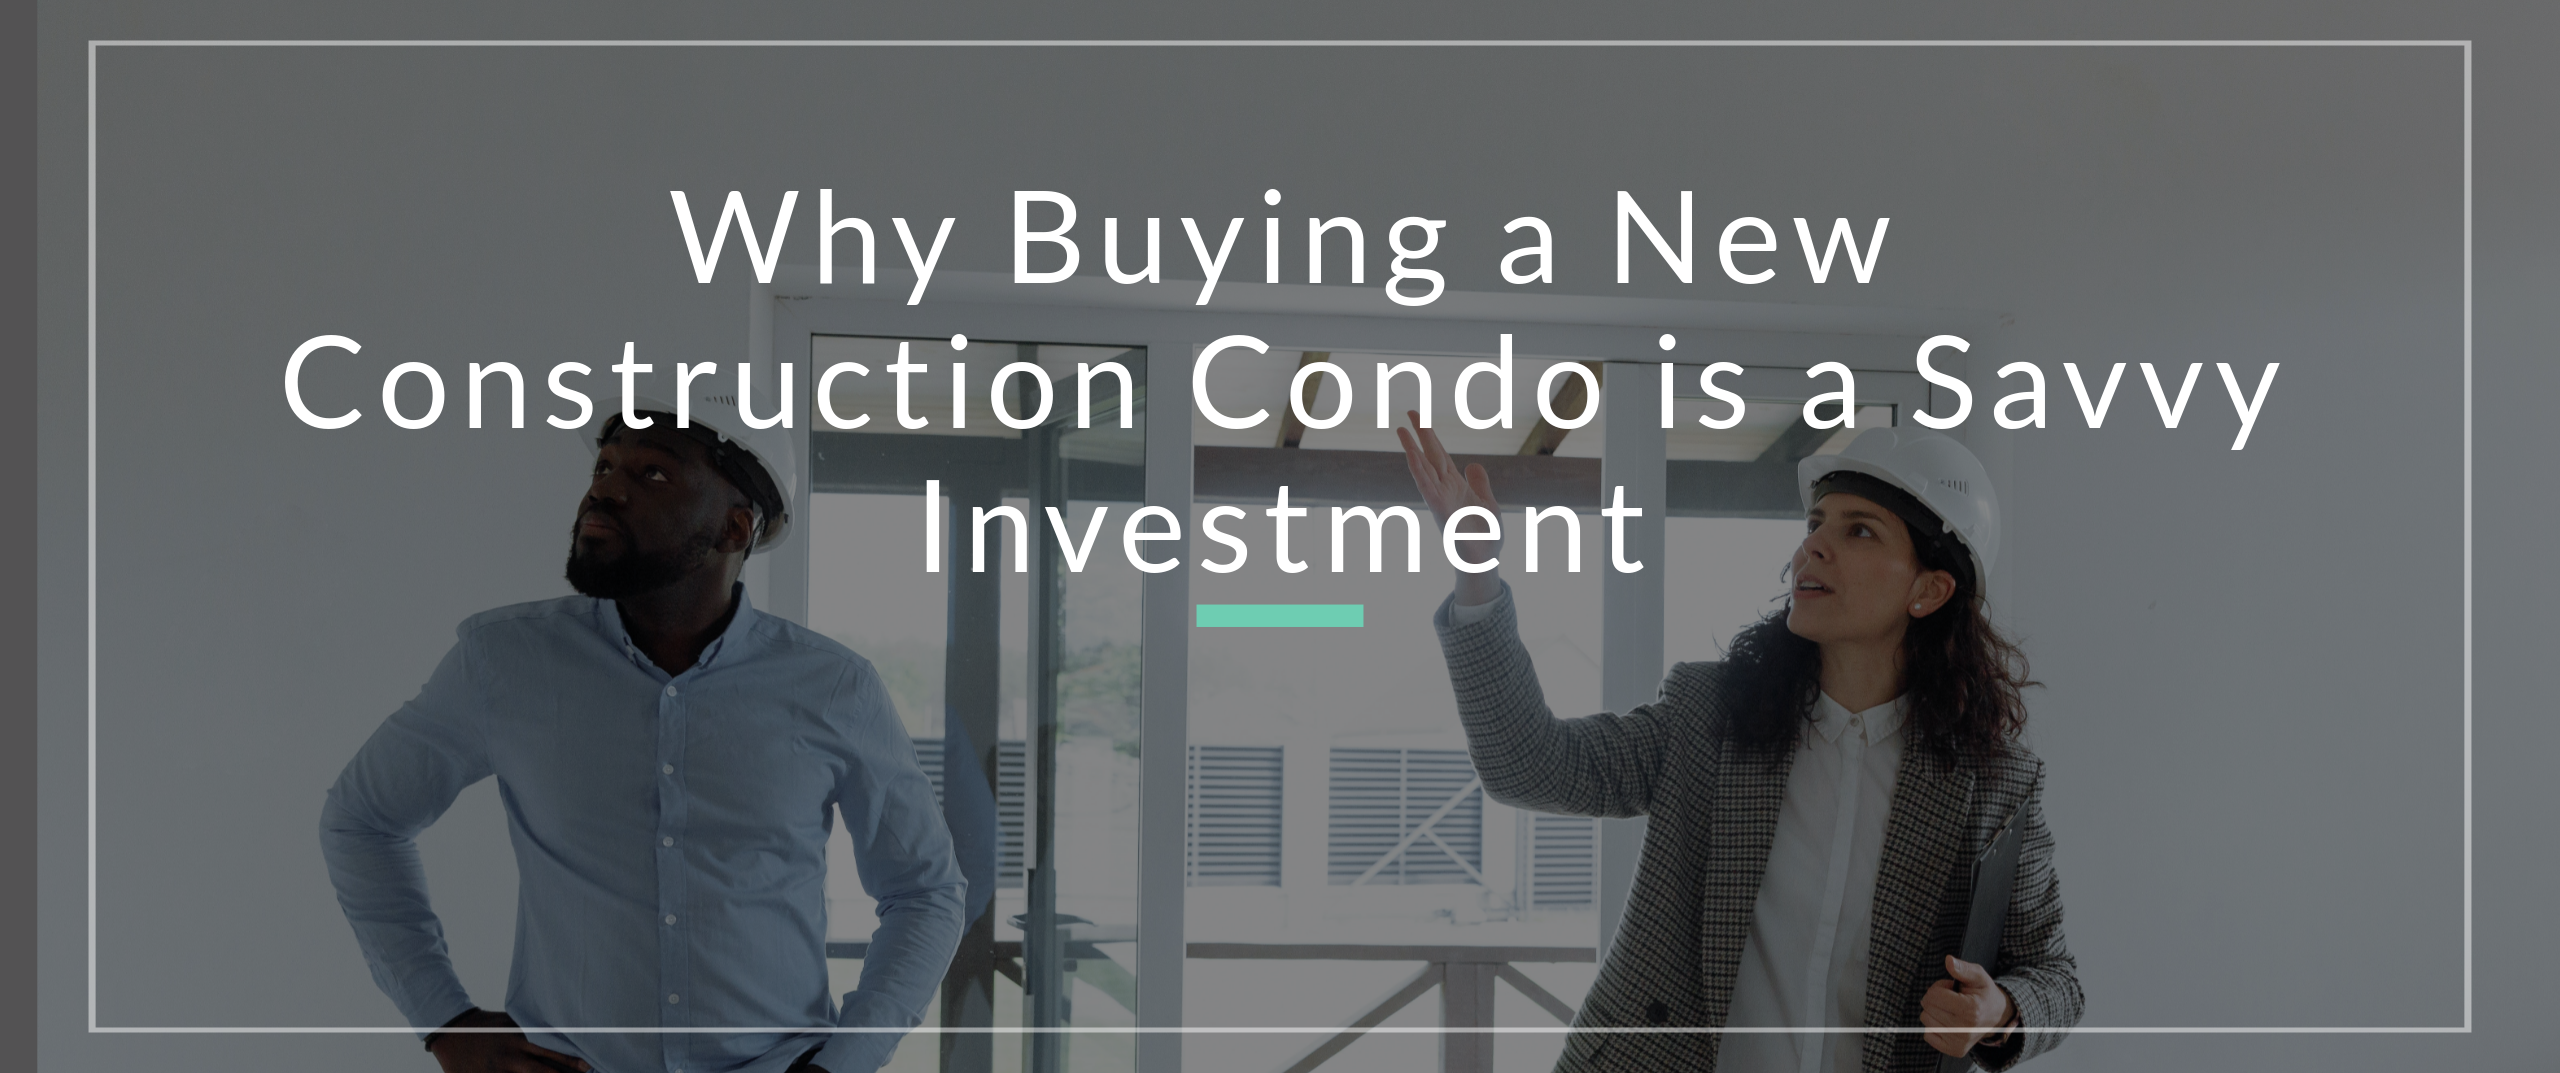 Why Buying A New Construction Condo is a Savvy Investment